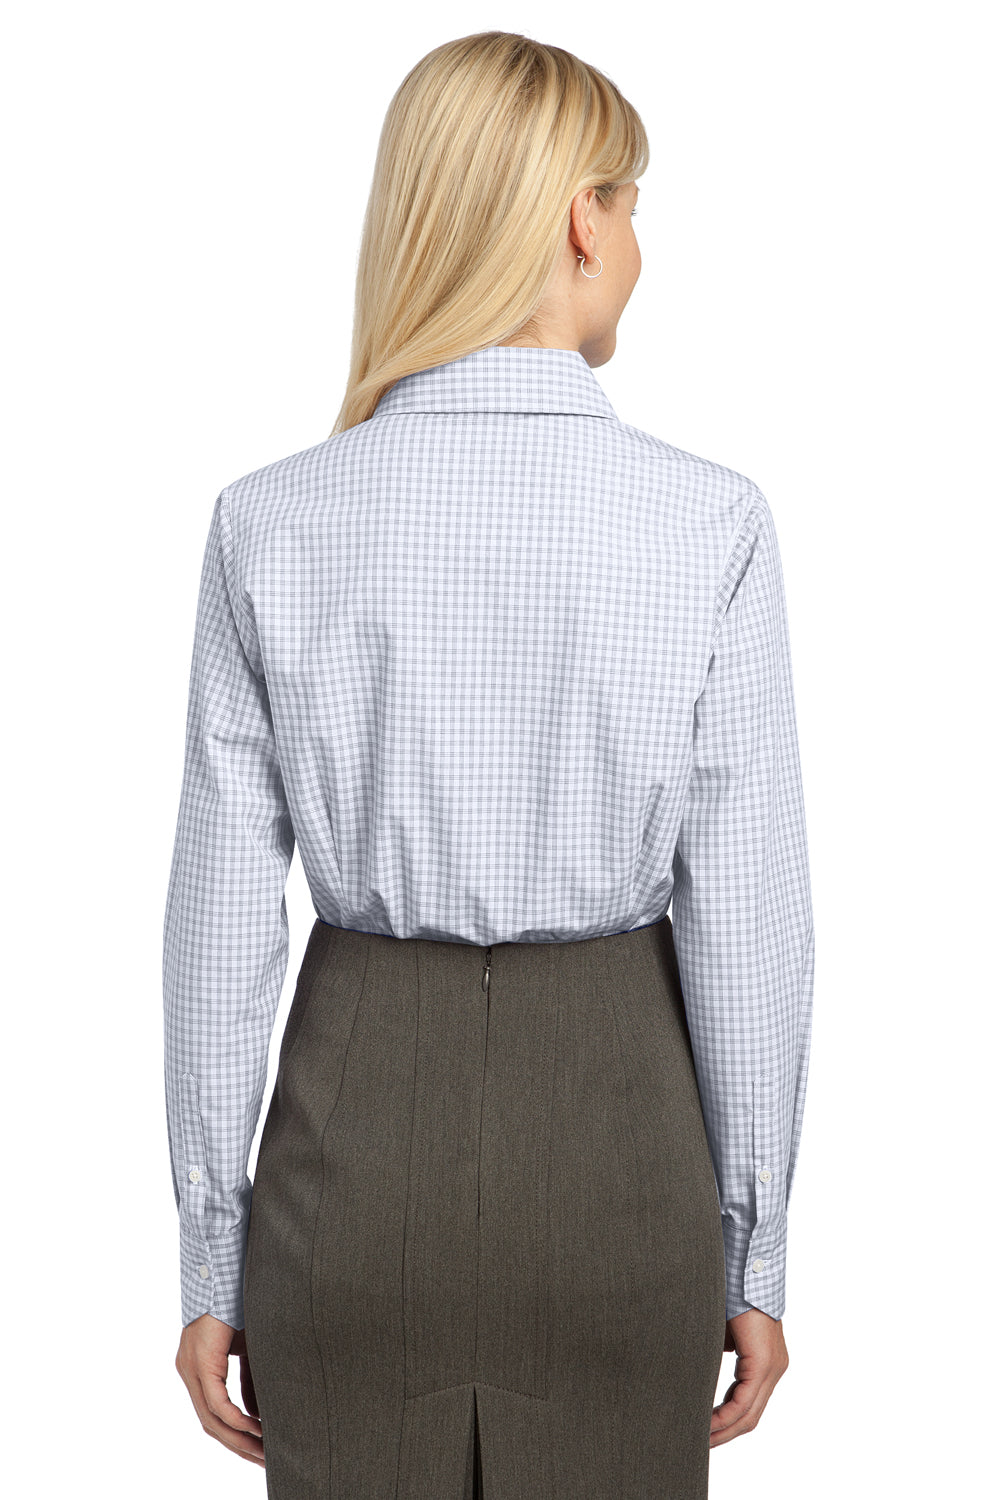 Port Authority L639 Womens Easy Care Wrinkle Resistant Long Sleeve Button Down Shirt White Back